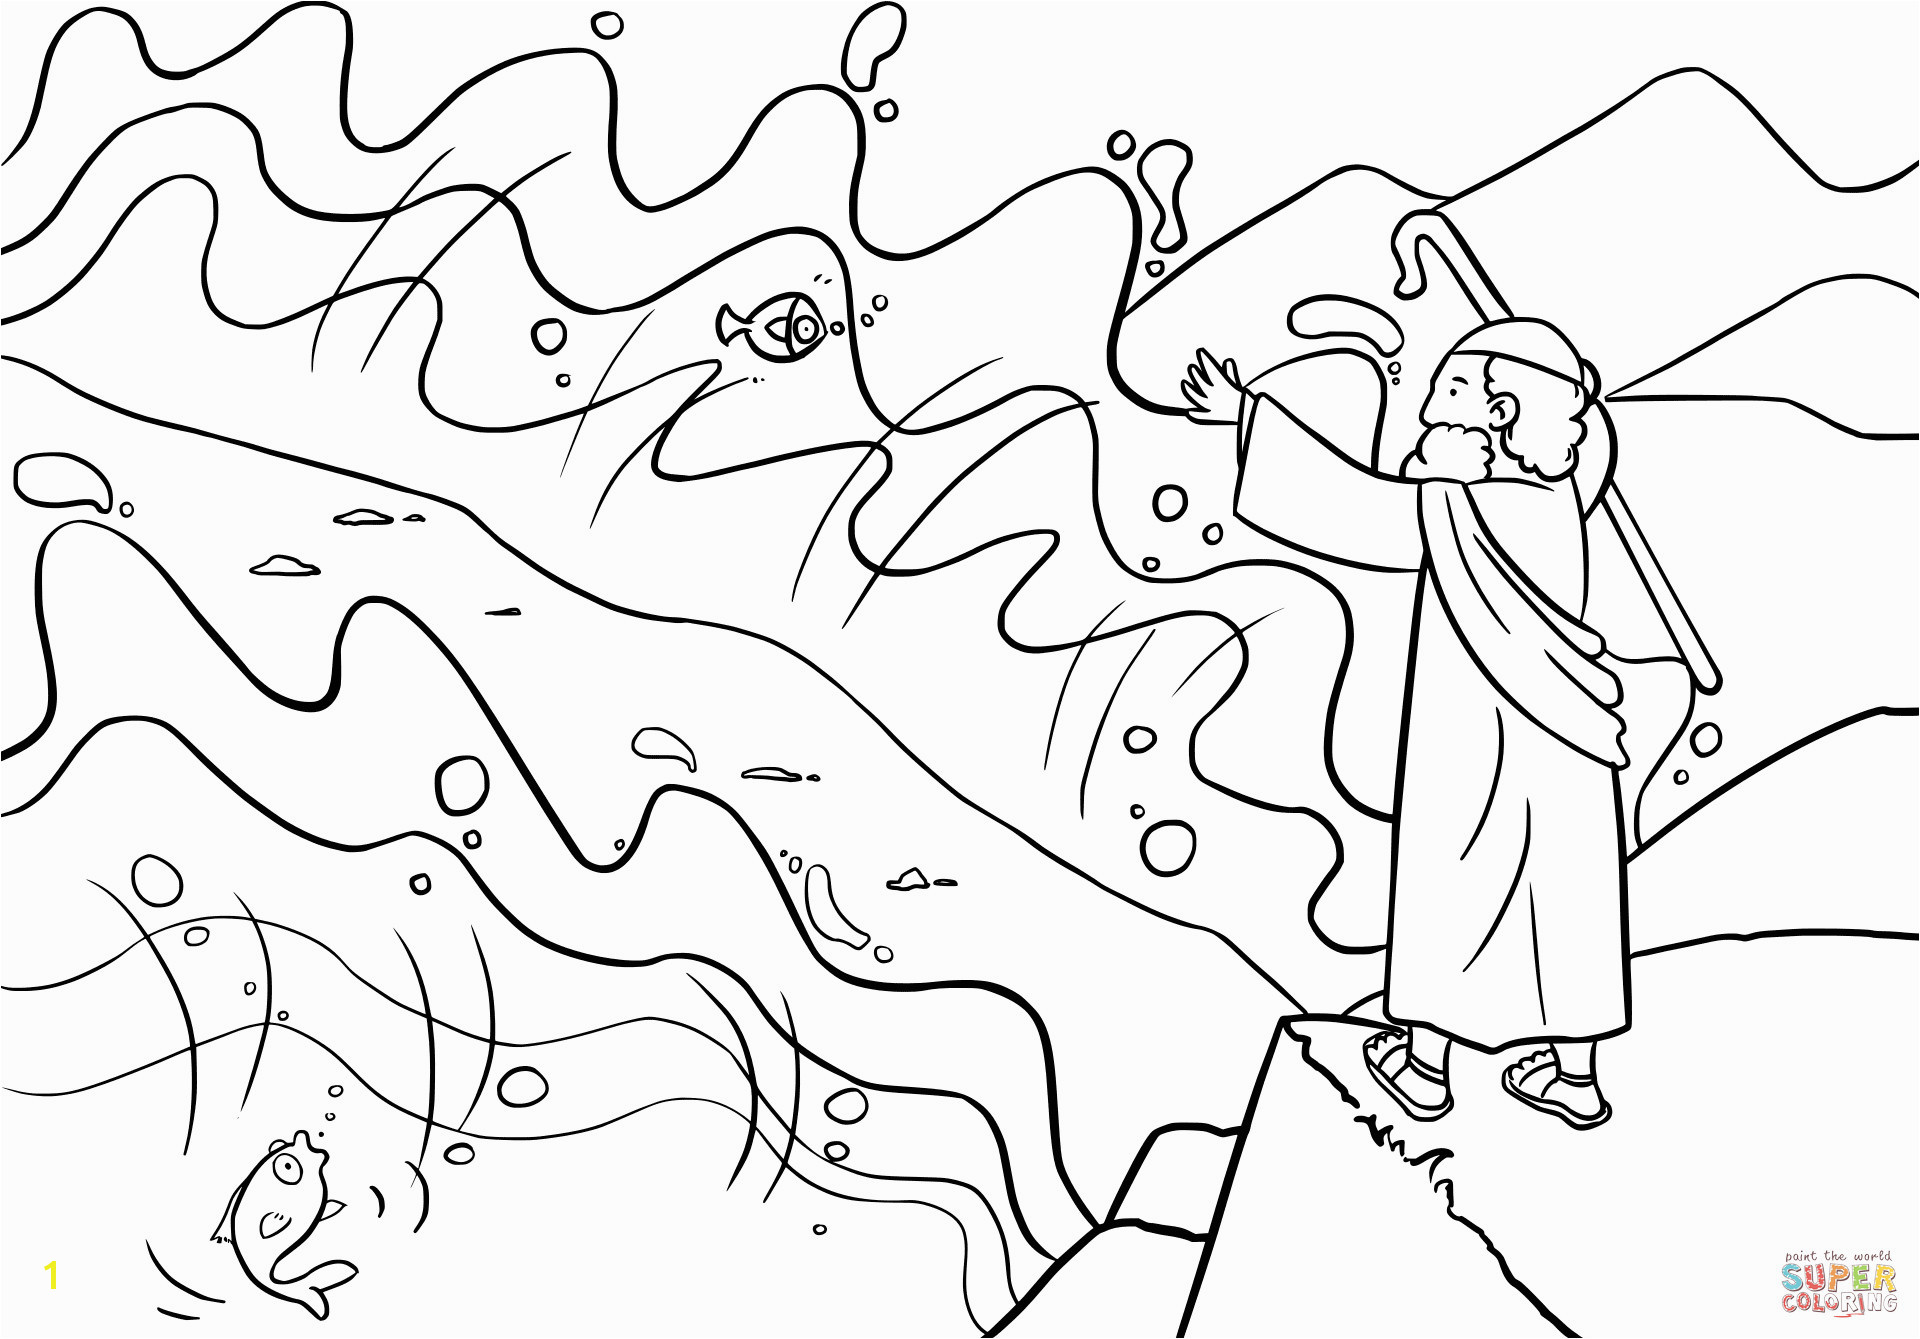 Printable Coloring Pages Of Moses Parting the Red Sea Moses 10 Plagues Egypt and Crossing the Red Sea Bible Craft In